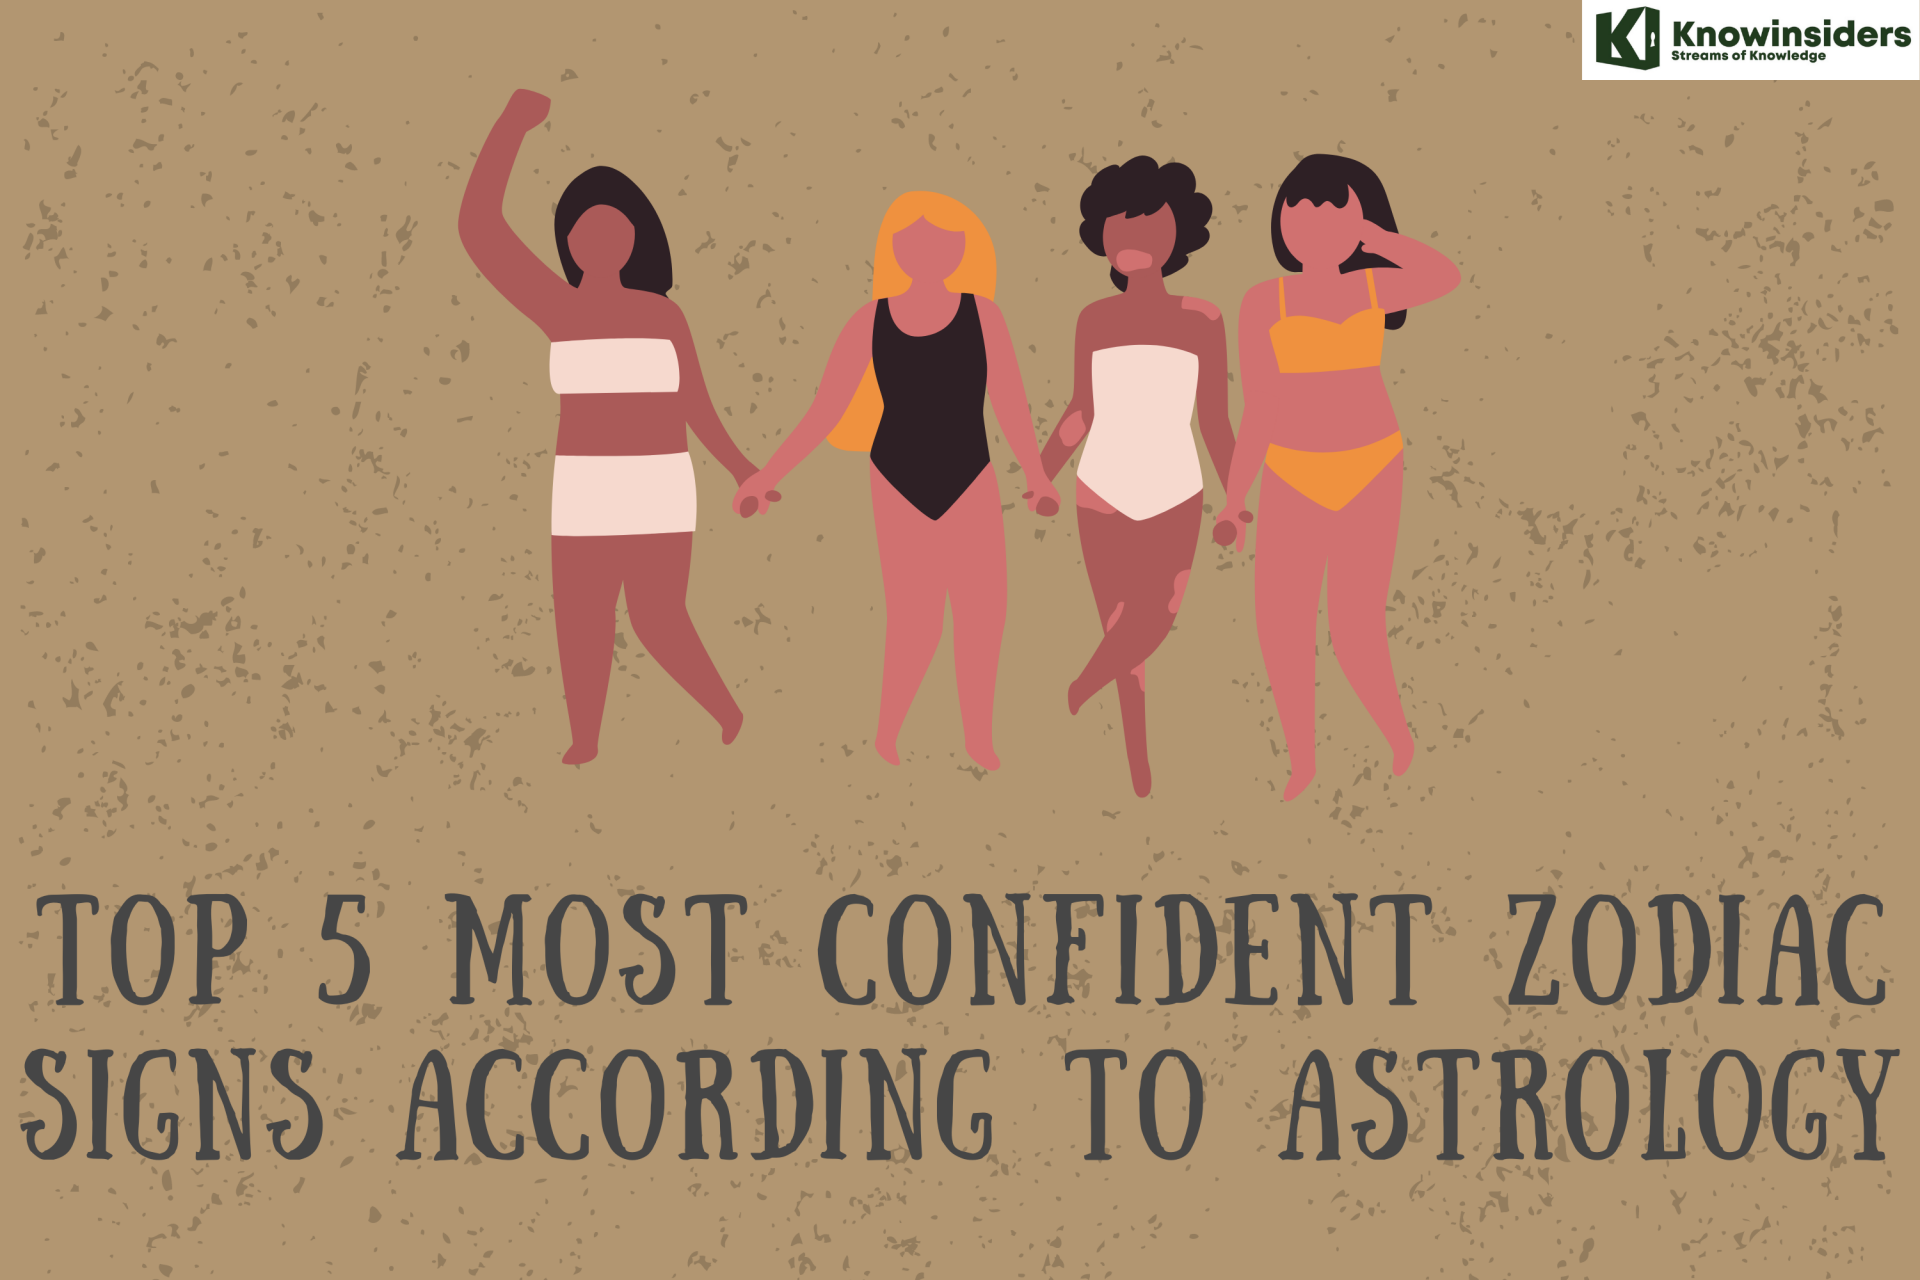 Top 5 Most Confident Zodiac Signs According to Astrology